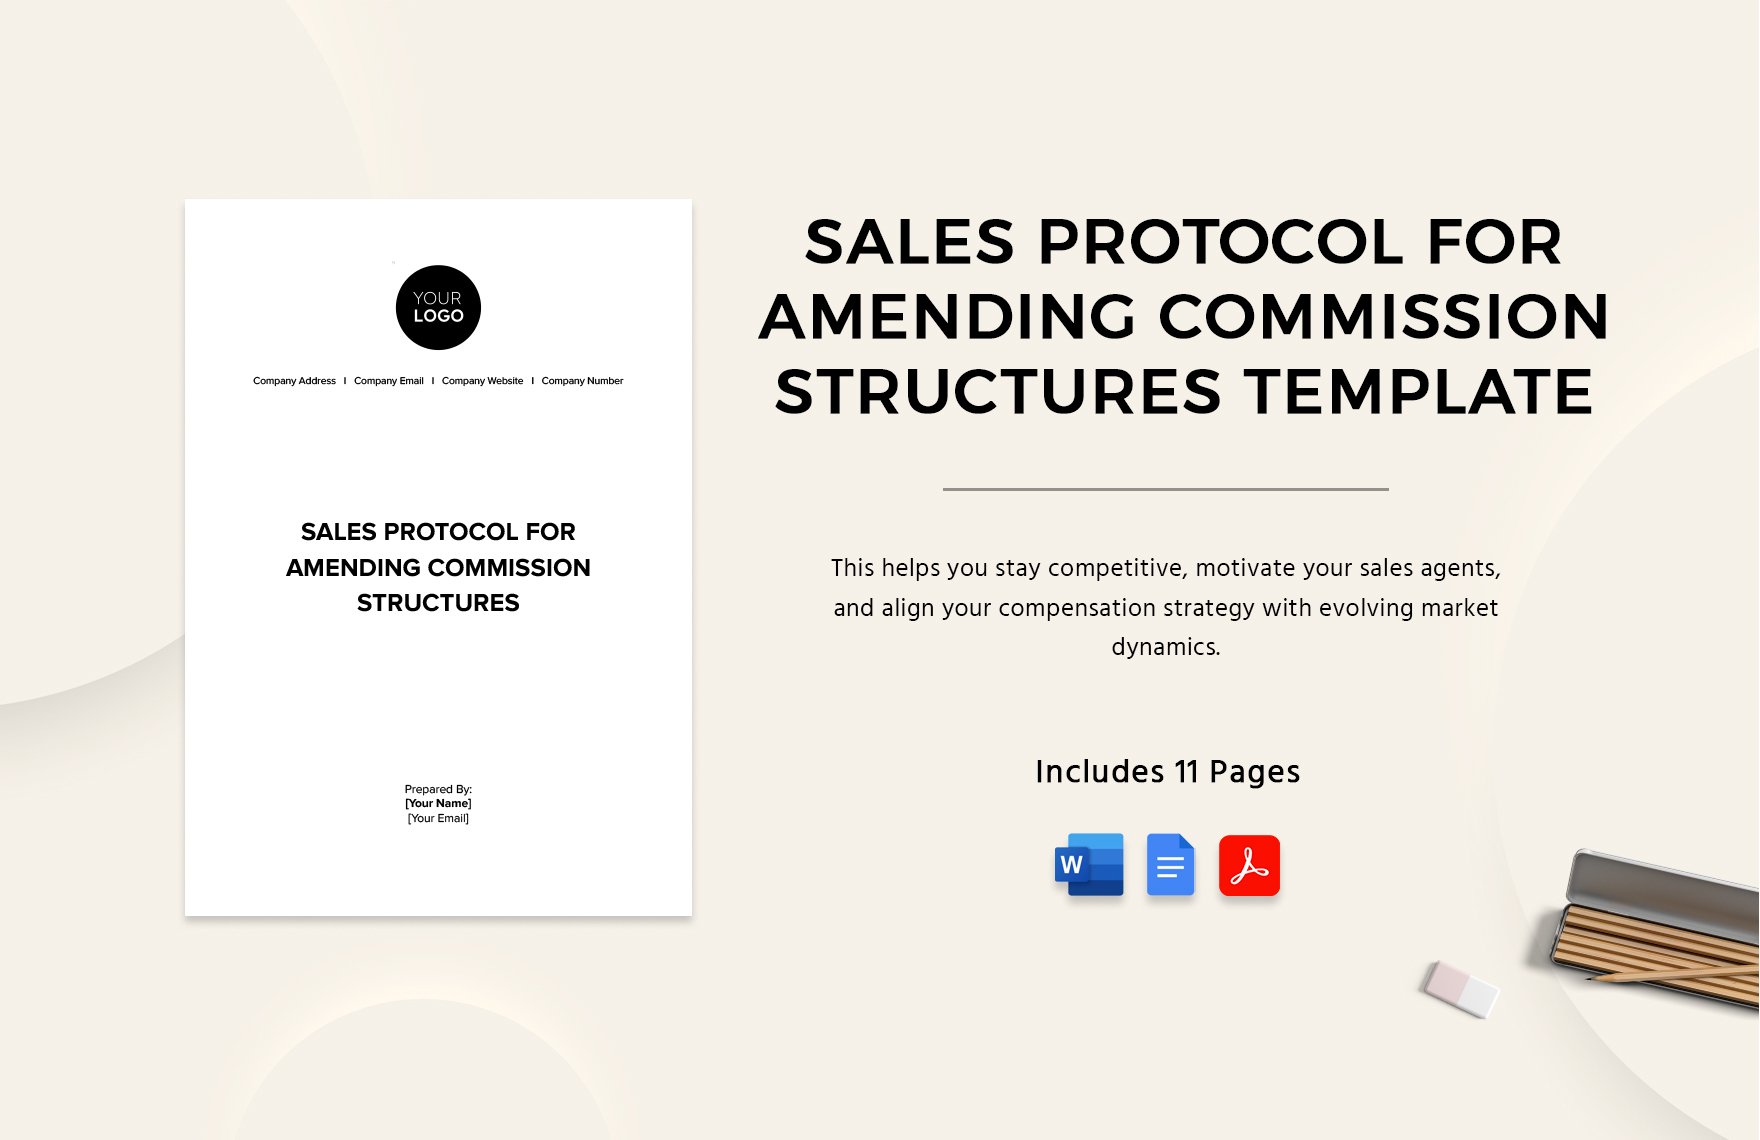 Sales Protocol for Amending Commission Structures Template